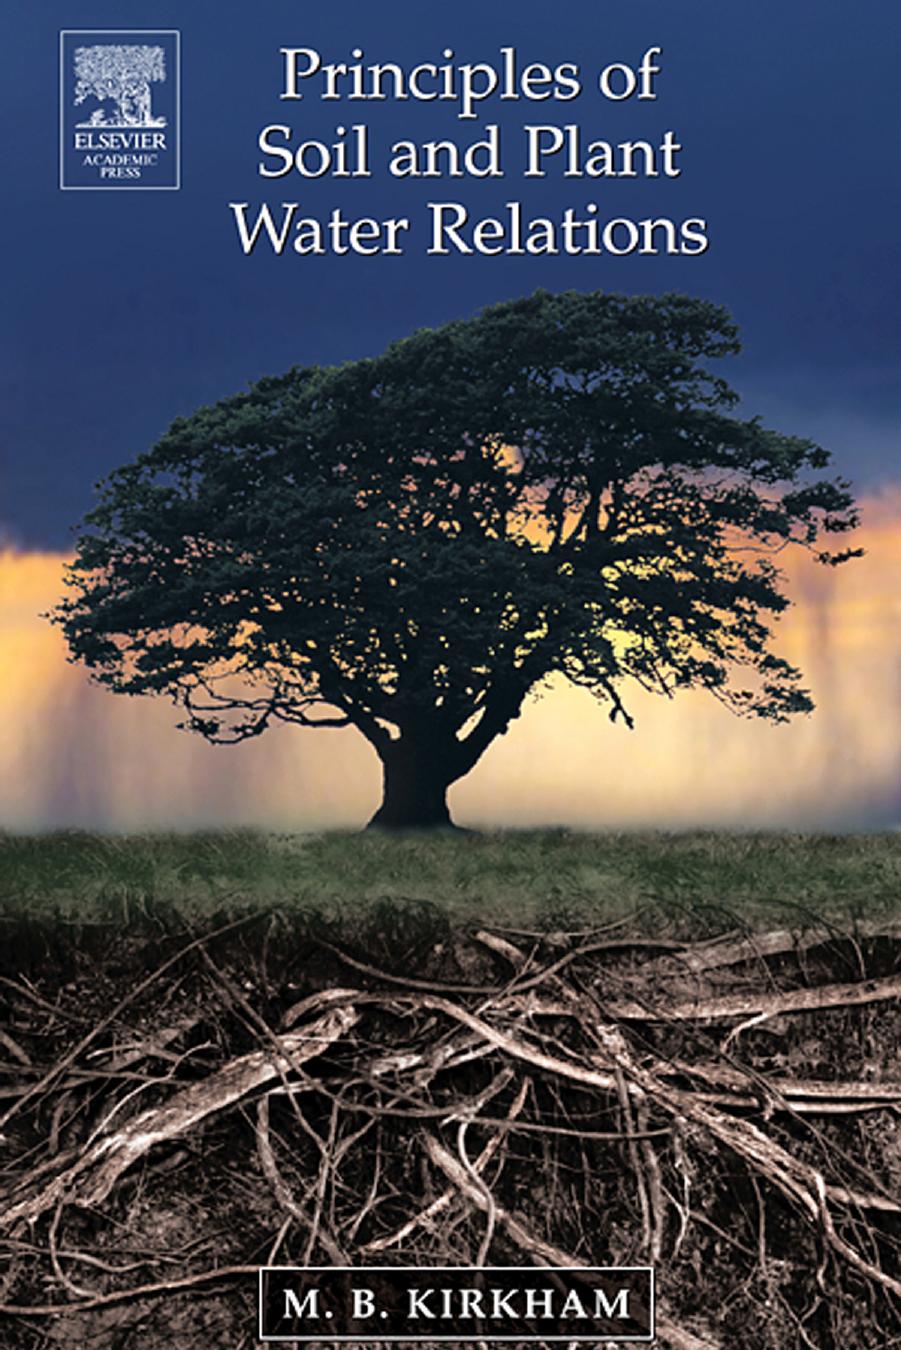 Principles of Soil and Plant Water Relations 2005